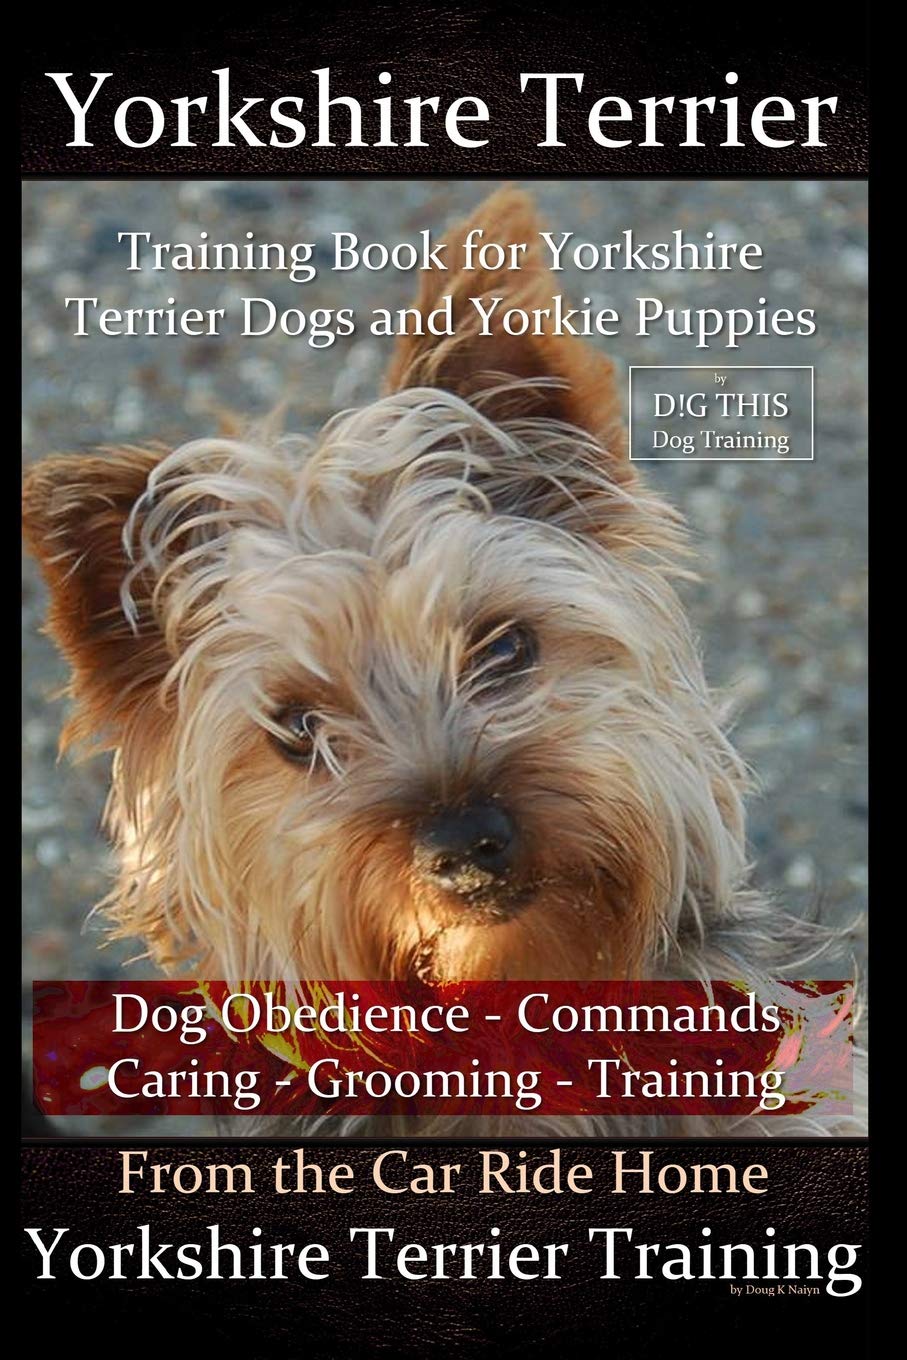 Yorkshire Terrier Training Book for Yorkshire Terrier Dogs and Yorkie Puppies By D!G THIS Dog Obedience – Commands - Caring - Grooming – Training: From the Car Ride Home Yorkshire Terrier Training     Paperback – February 15, 2019